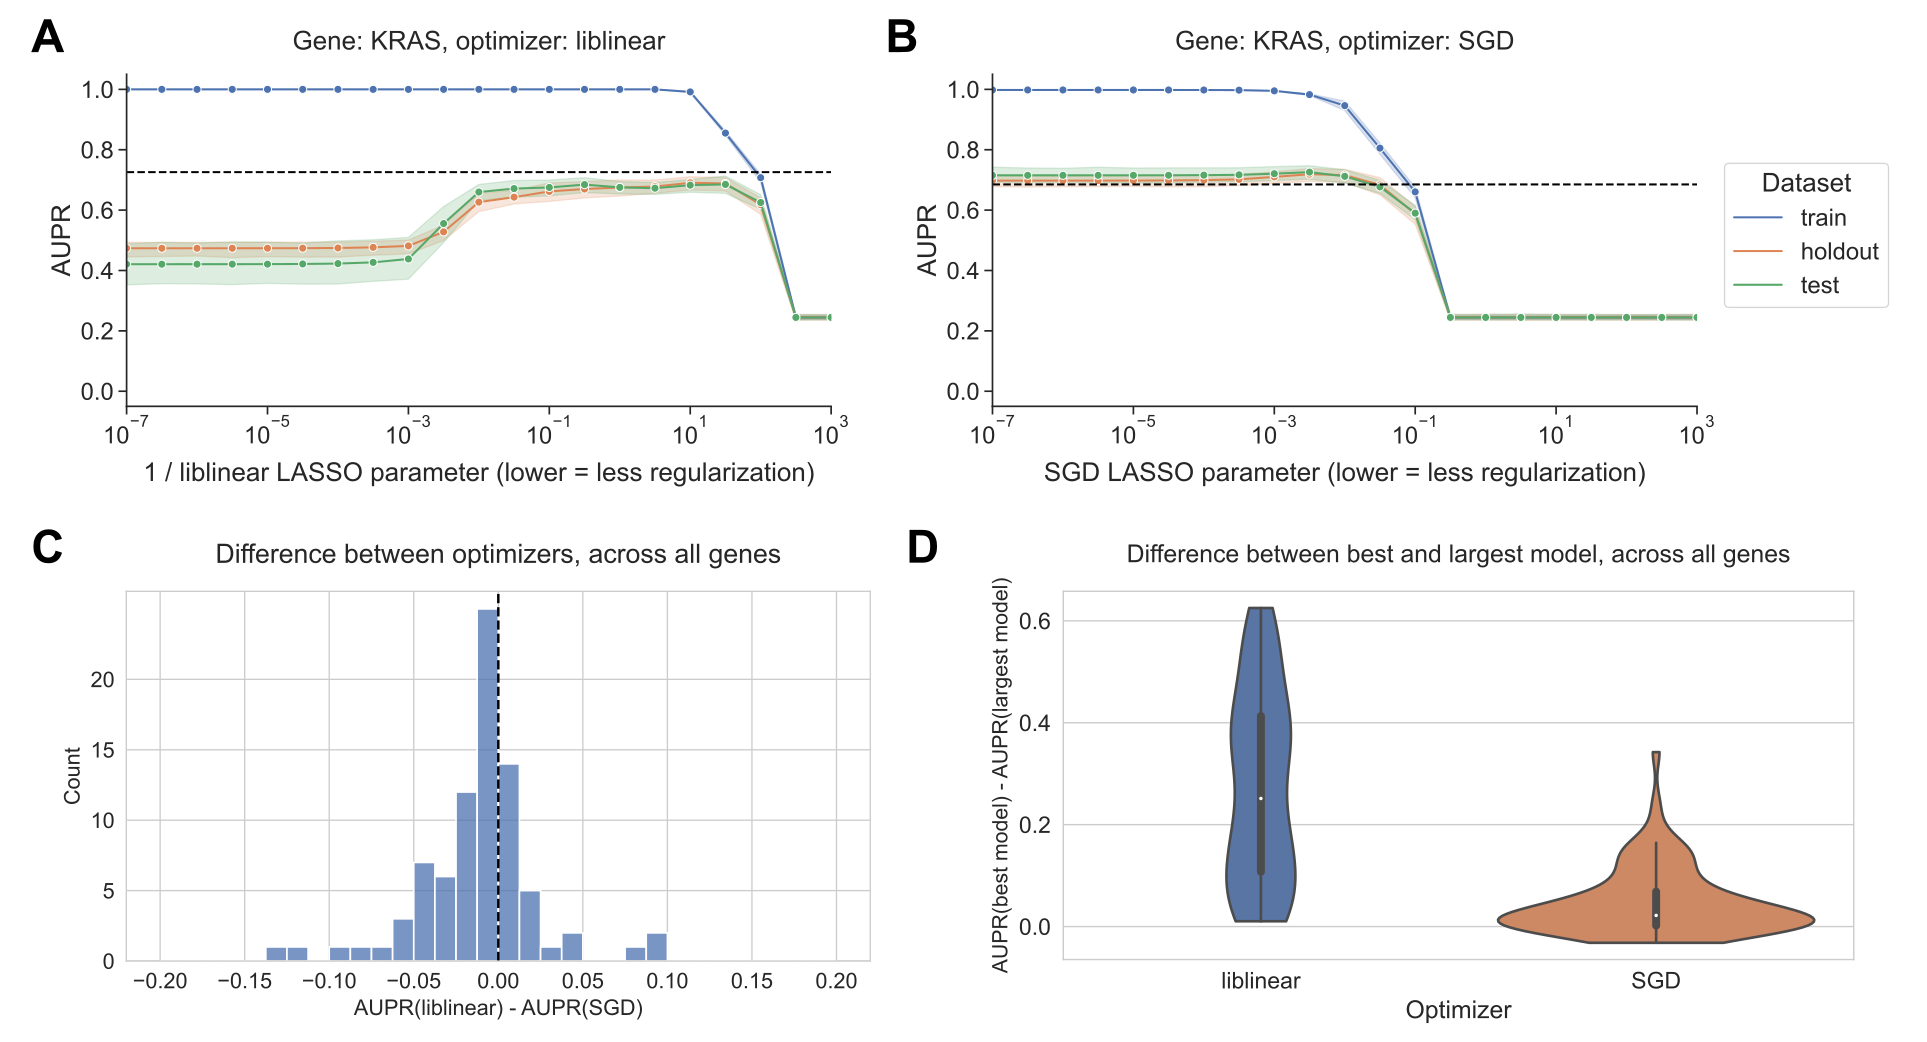 Figure 1: A. Performance vs. inverse regularization parameter for KRAS mutation status prediction, using the liblinear coordinate descent optimizer. Dotted lines indicate top performance value of the opposite optimizer. B. Performance vs. regularization parameter for KRAS mutation status prediction, using the SGD optimizer. “Holdout” dataset is used for SGD learning rate selection, “test” data is completely held out from model selection and used for evaluation. C. Distribution of performance difference between best-performing model for liblinear and SGD optimizers, across all 84 genes in Vogelstein driver gene set. Positive numbers on the x-axis indicate better performance using liblinear, and negative numbers indicate better performance using SGD. D. Distribution of performance difference between best-performing model and largest (least regularized) model, for liblinear and SGD, across all 84 genes. Smaller numbers on the y-axis indicate less overfitting, and larger numbers indicate more overfitting.